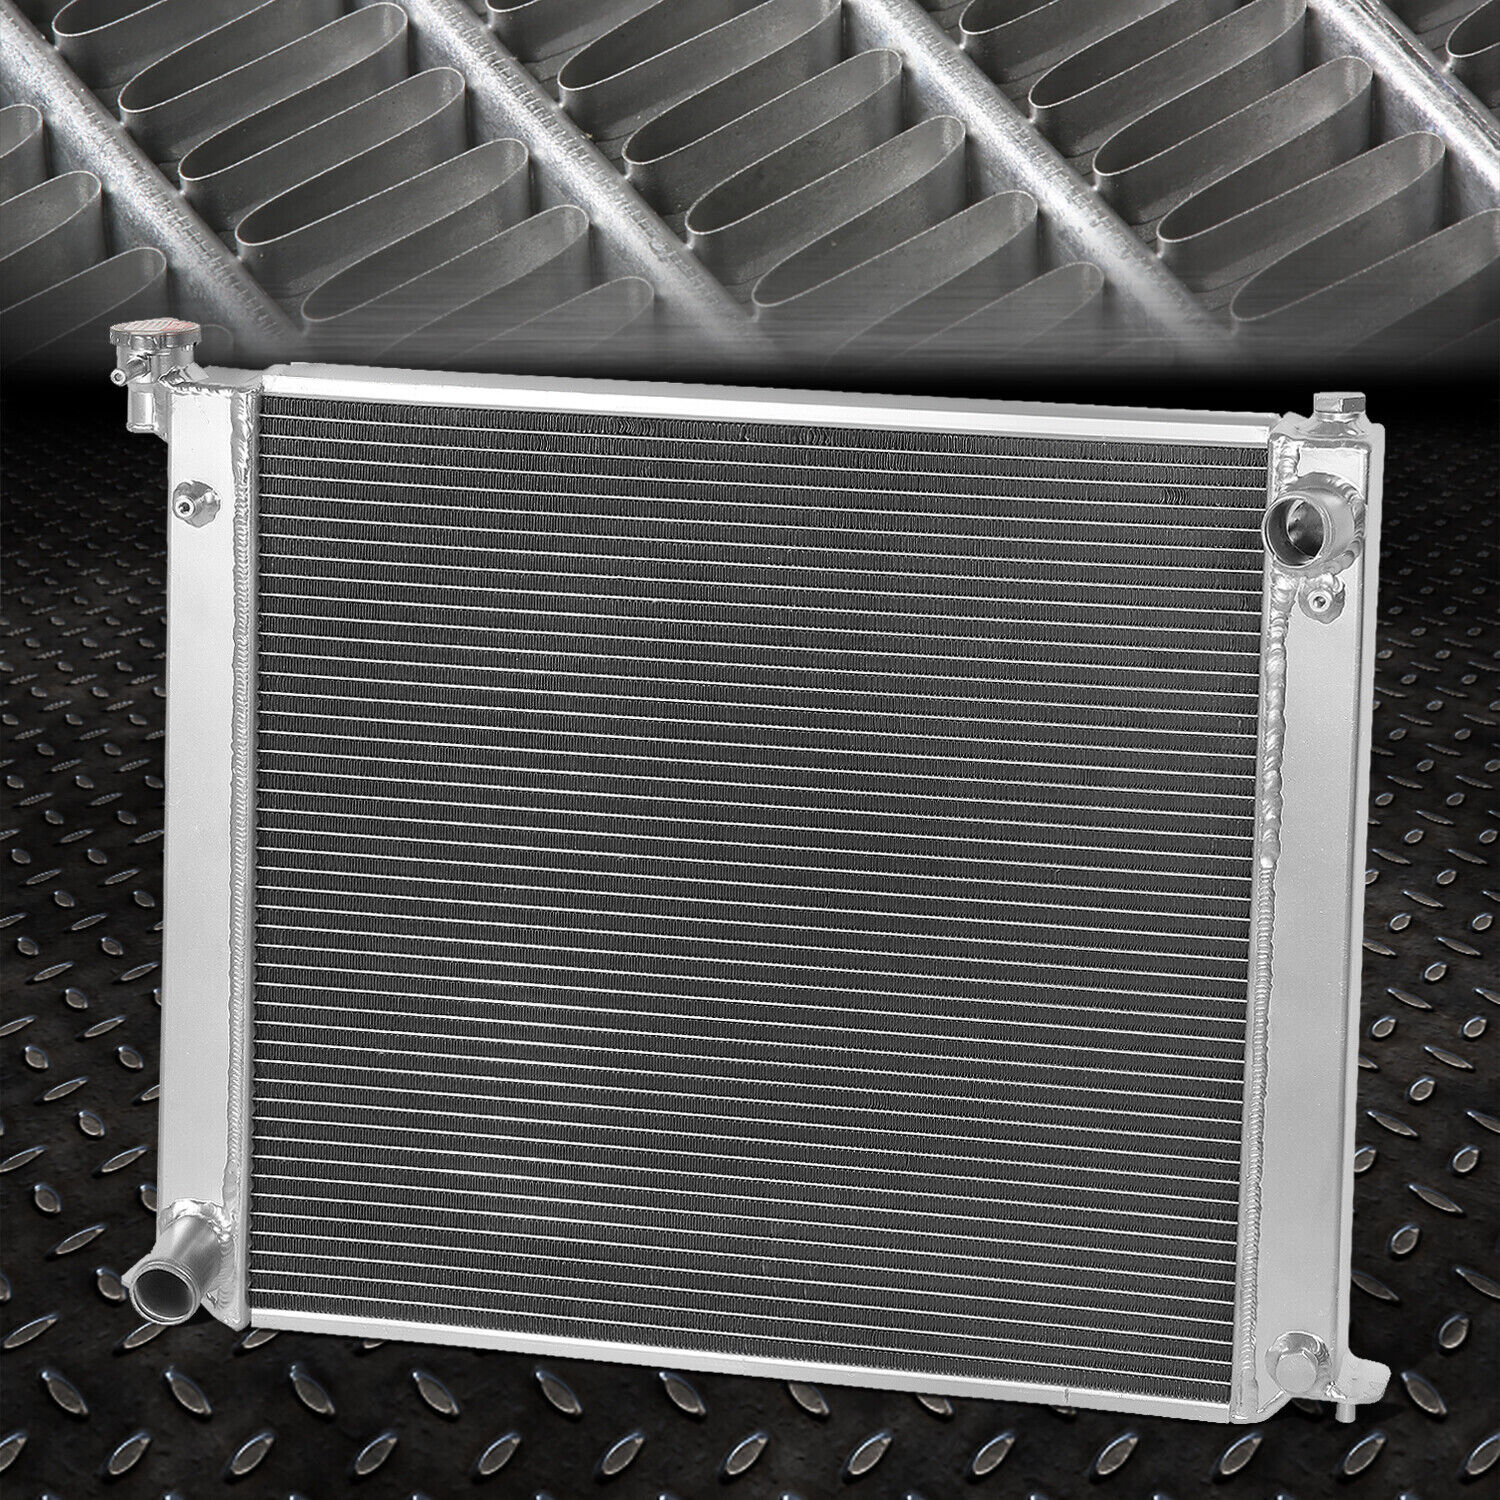 2-Row Aluminum Core Racing Radiator Replacement for 90-96 300ZX Fairlady Z32 MT